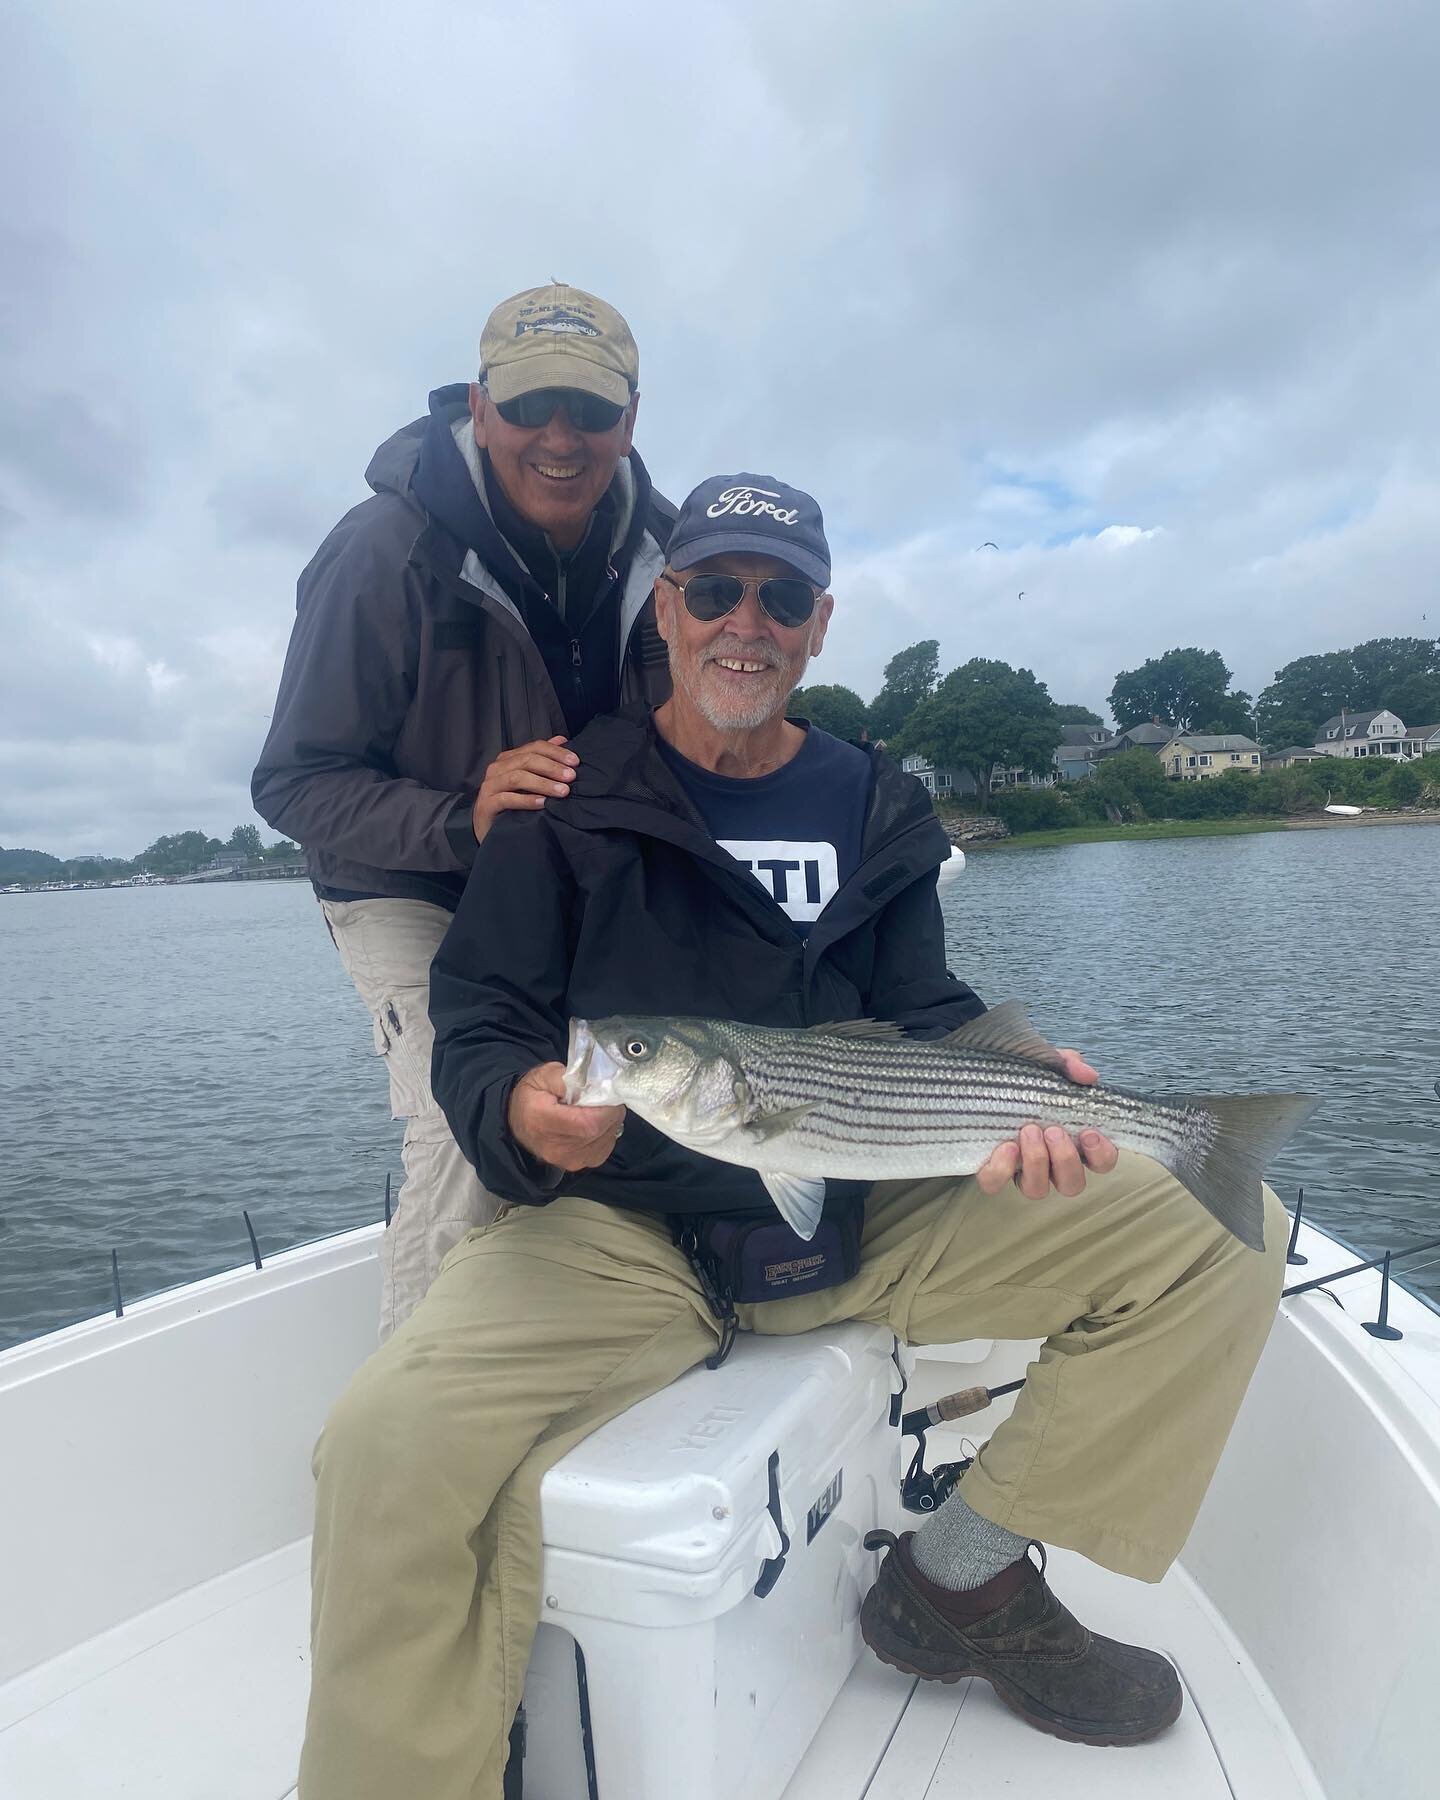 Fun morning yesterday with these guys. Little slow in the early fog. Picked up as tide started moving and fog burned off. #stripedbass #cascobay #catchandrelease #maineguide #rockandsandcharters